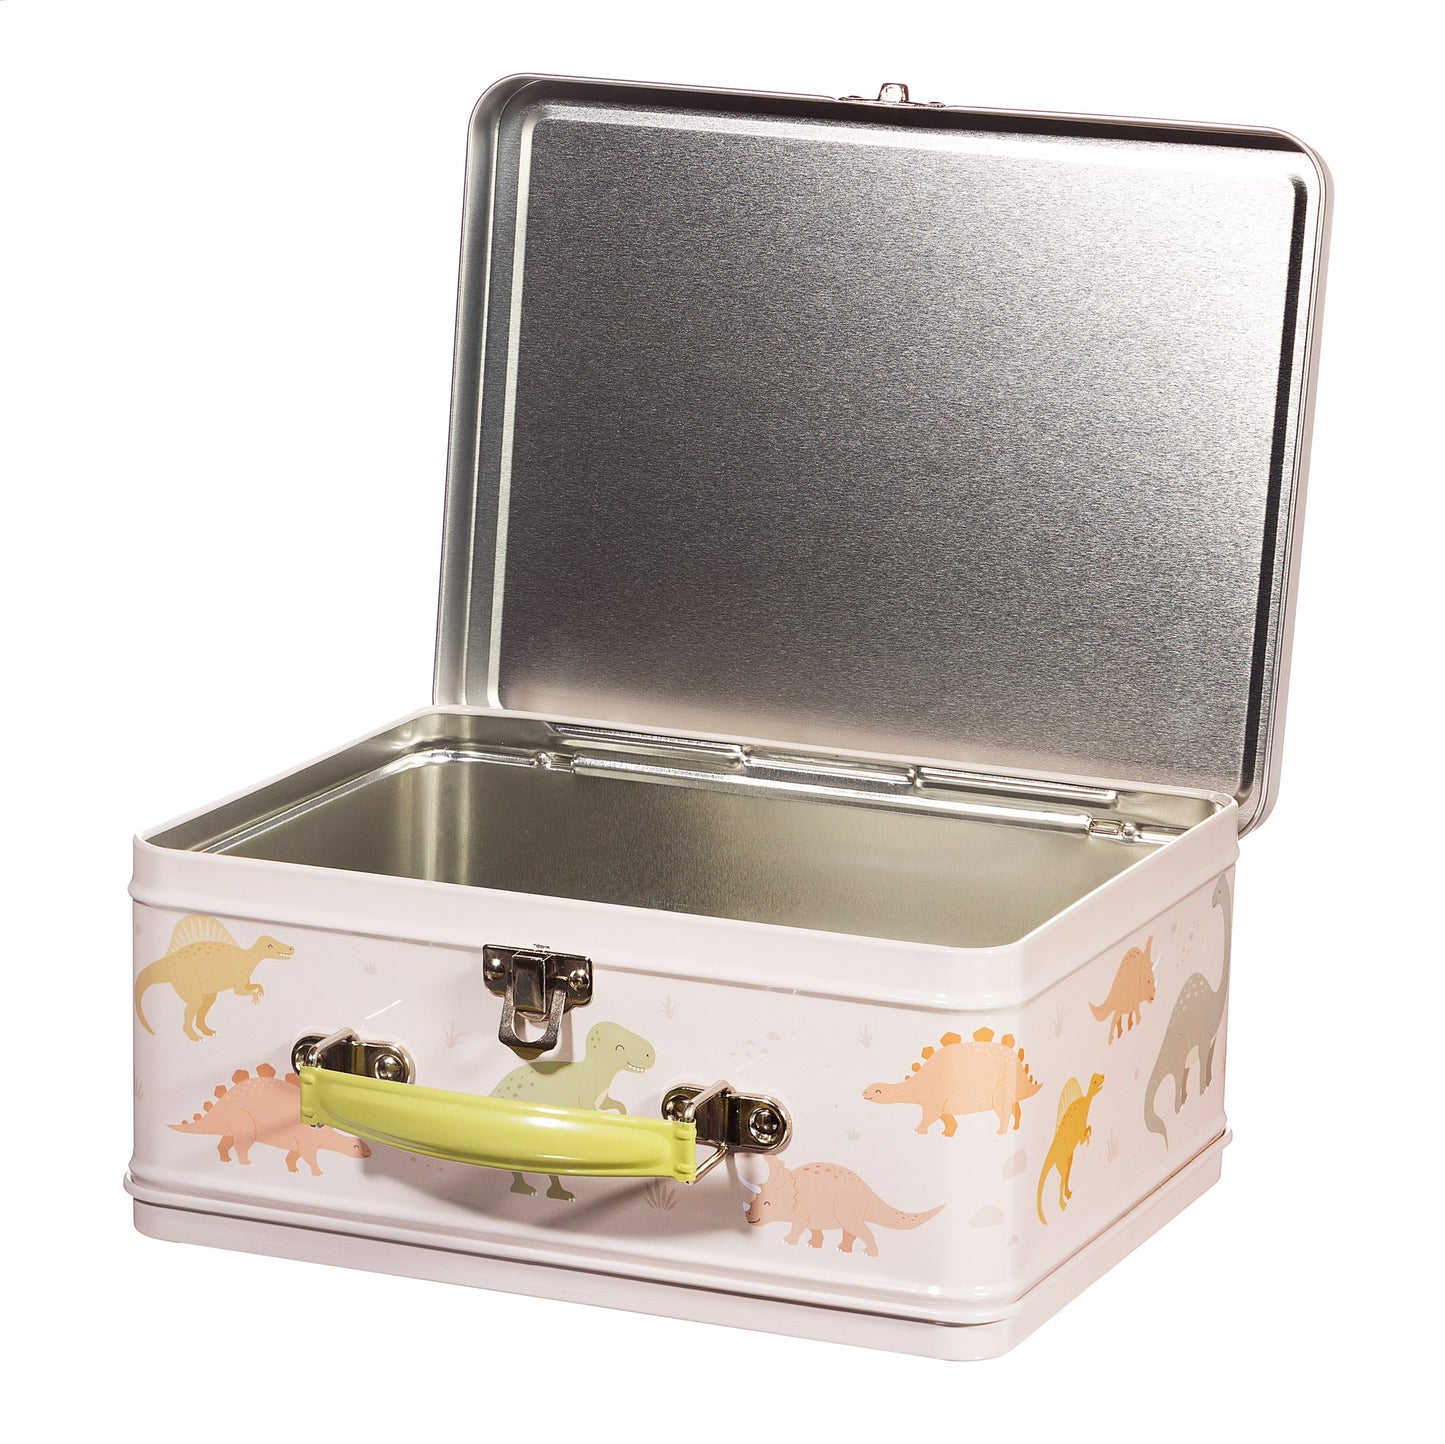 Desert Dino Metal Lunch Box by Sass and Belle